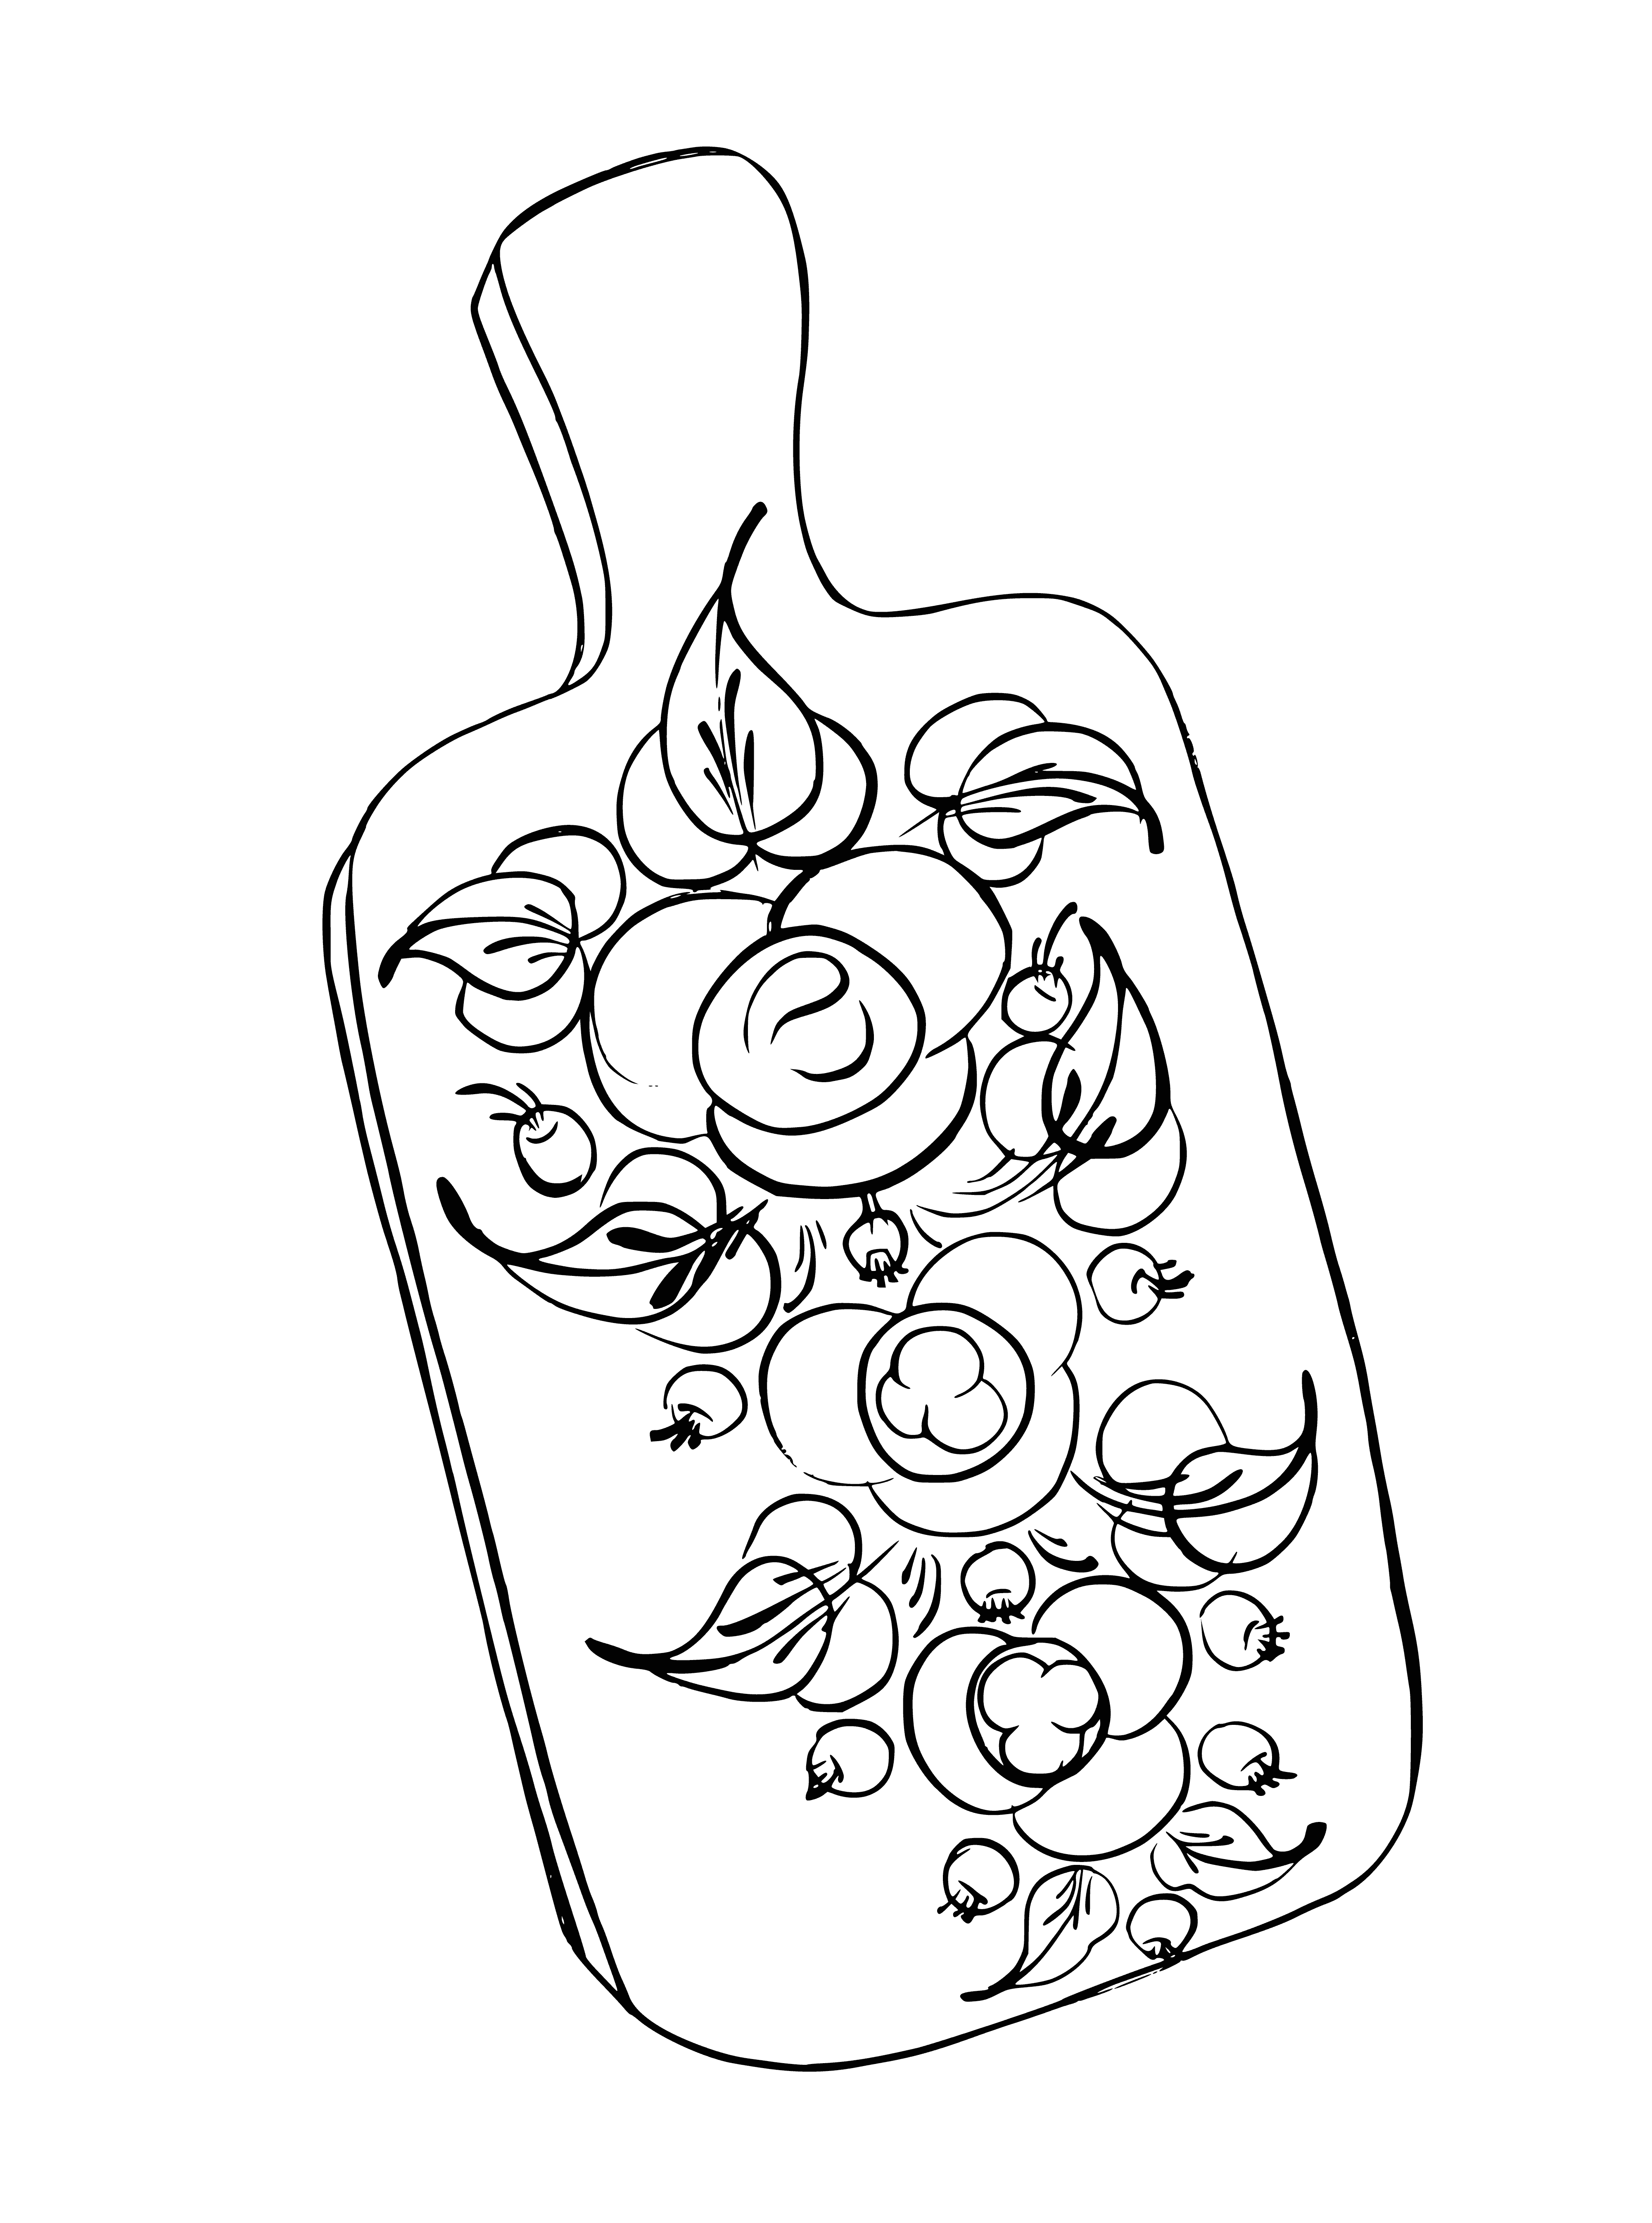 Board coloring page